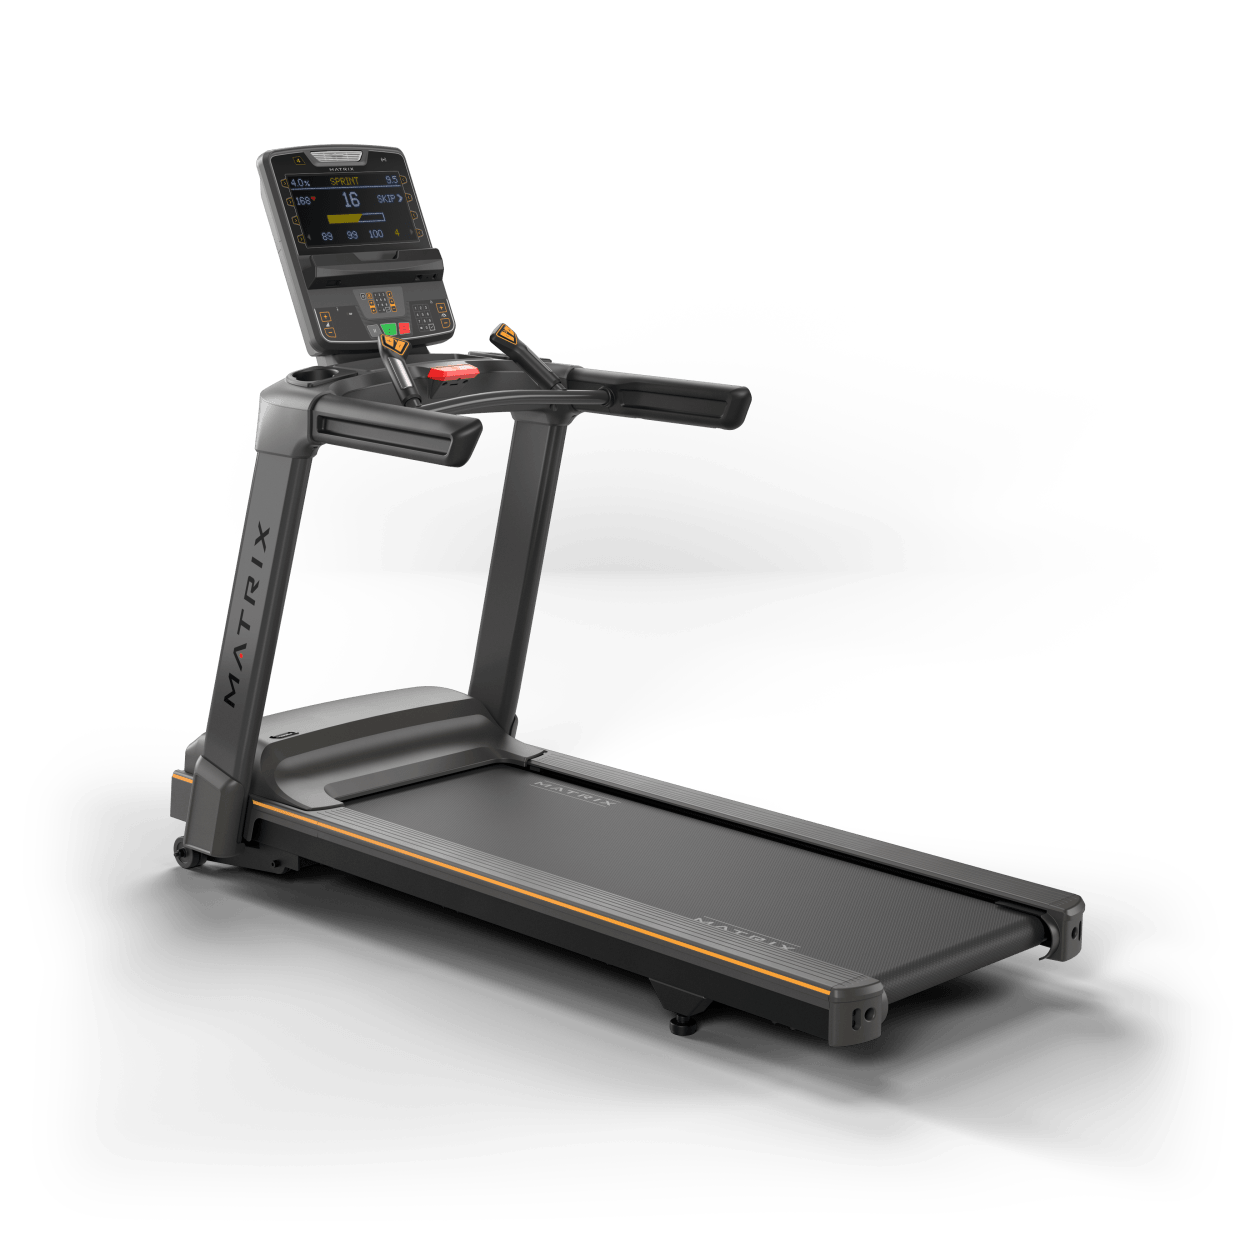 Matrix Fitness Lifestyle Treadmill with Premium LED Console full view | Fitness Experience